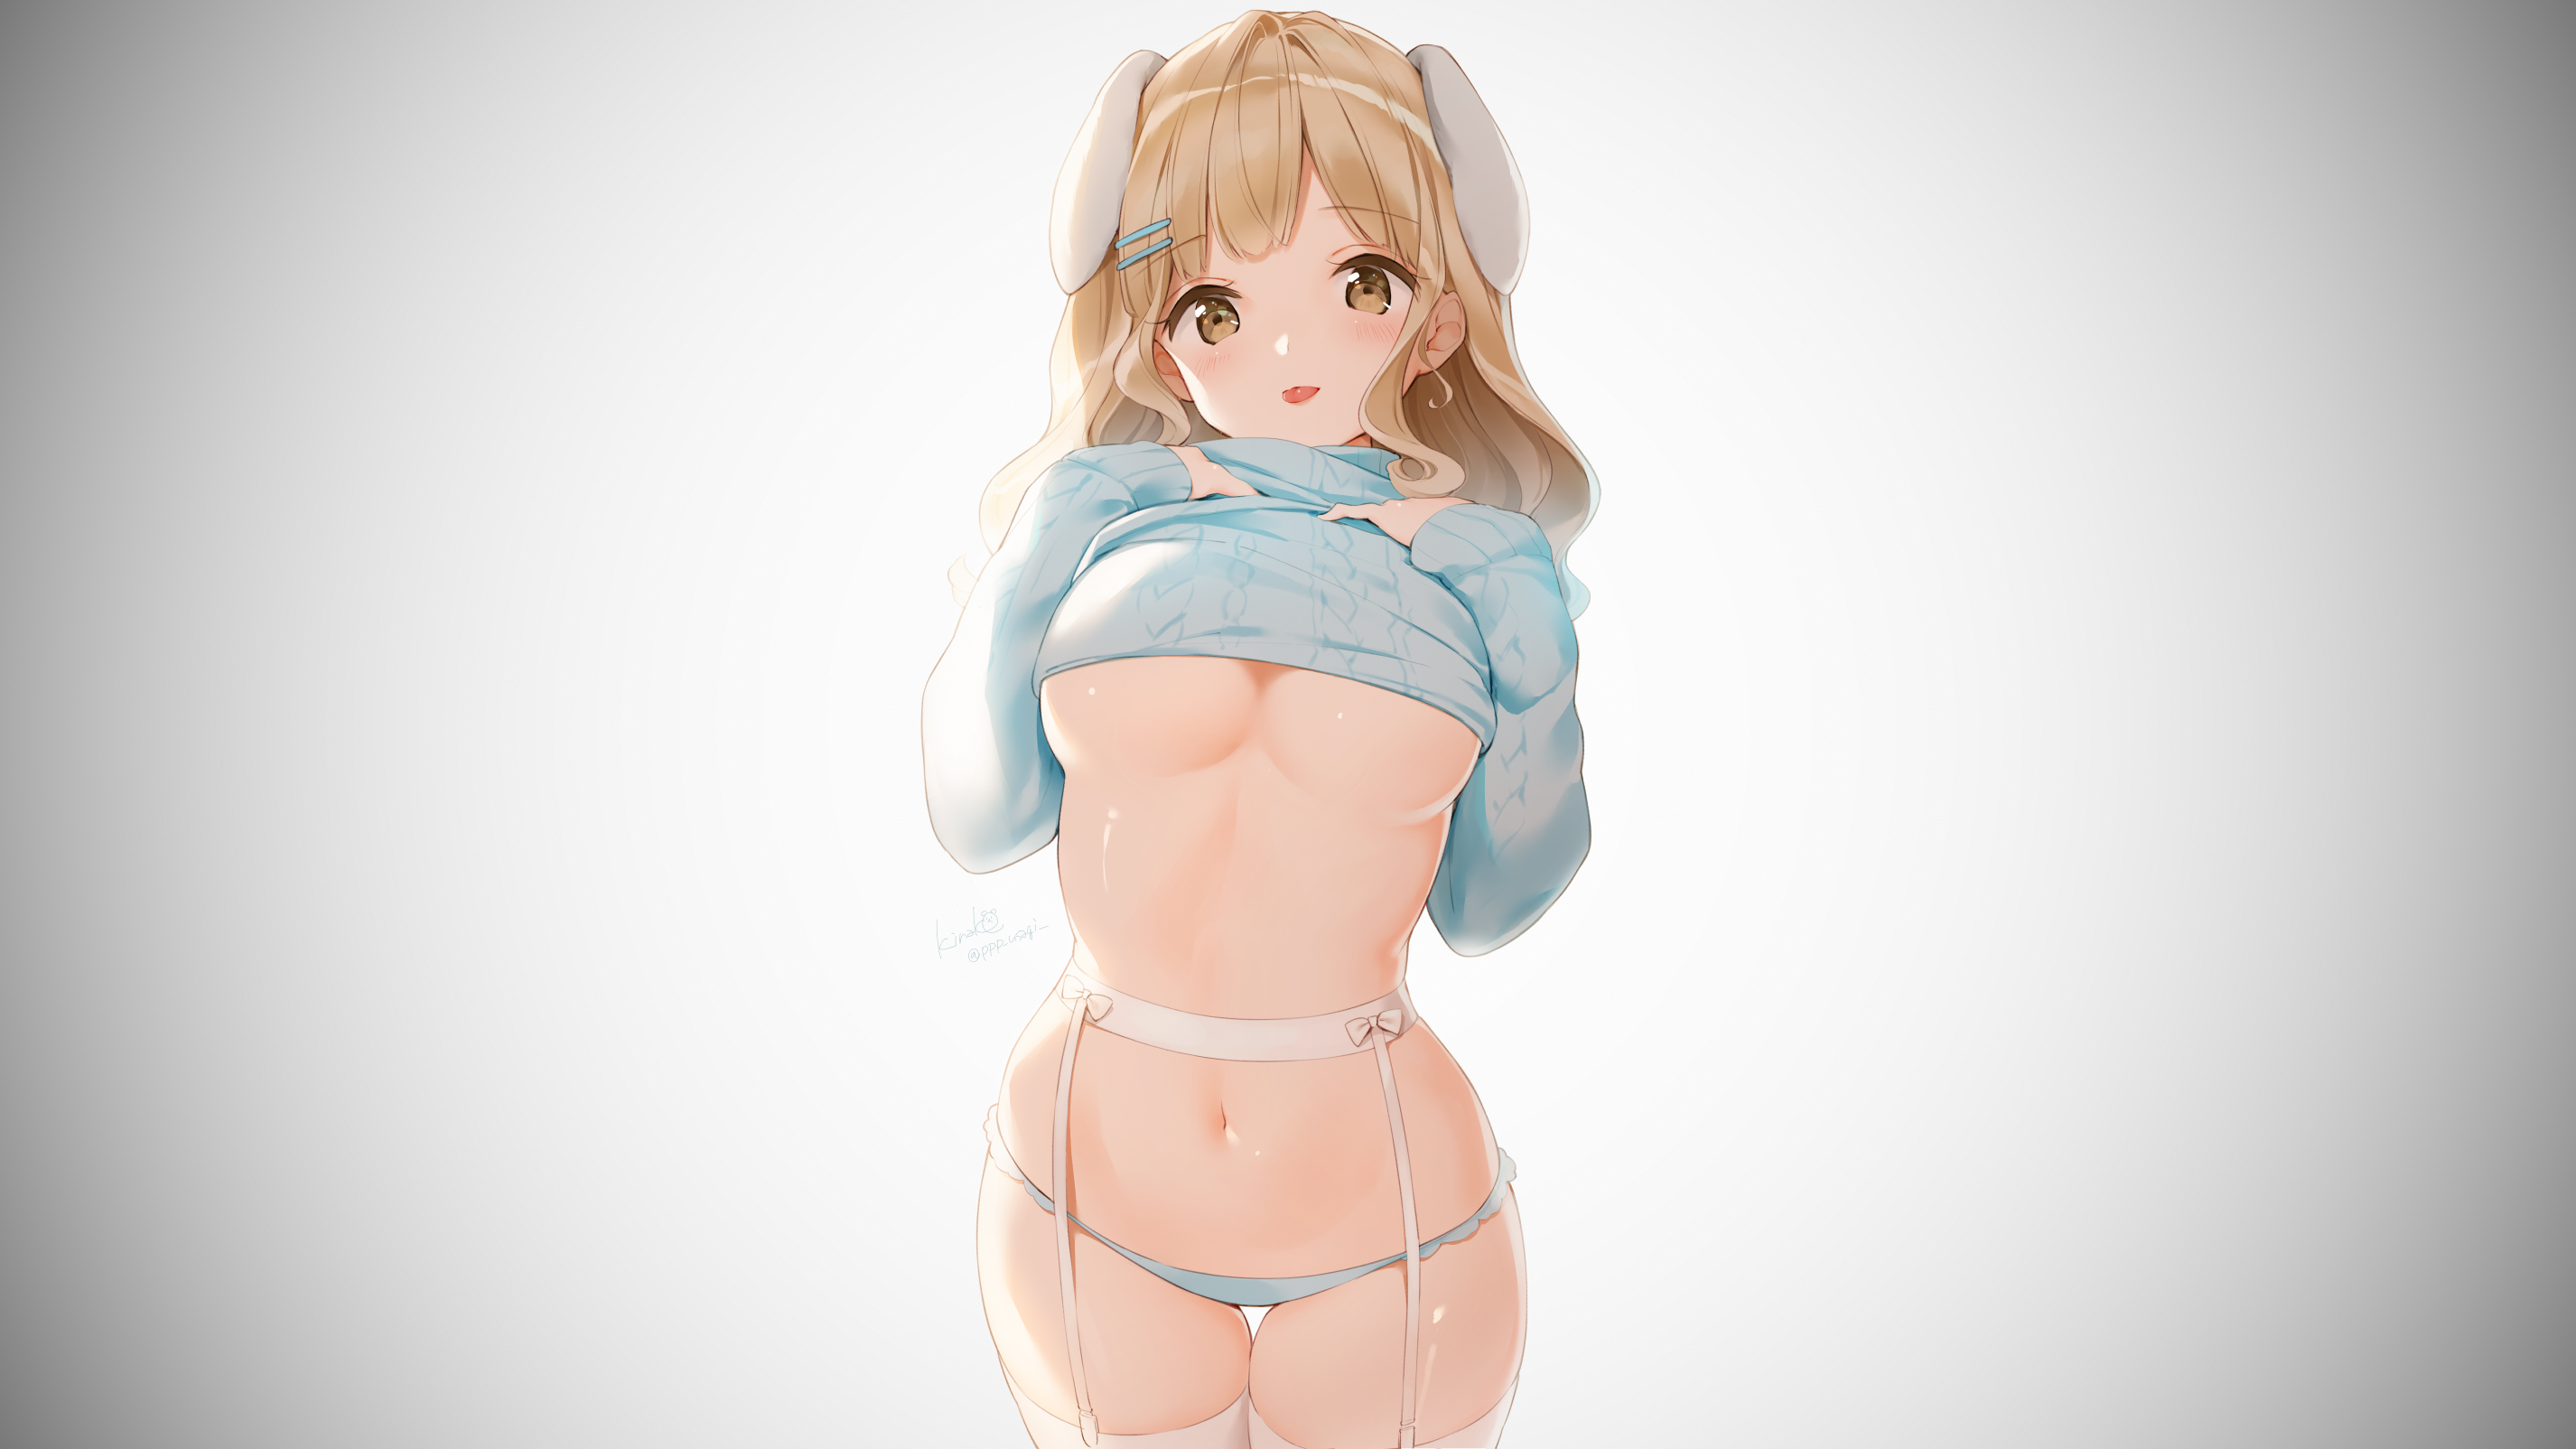 Anime 2852x1604 anime girls anime original characters bunny ears blonde looking at viewer blushing tongue out sweater no bra underboob belly garter belt garter straps stockings thigh-highs panties the gap white background simple background white vignette curvy frontal view artwork drawing digital art 2D illustration wavy hair